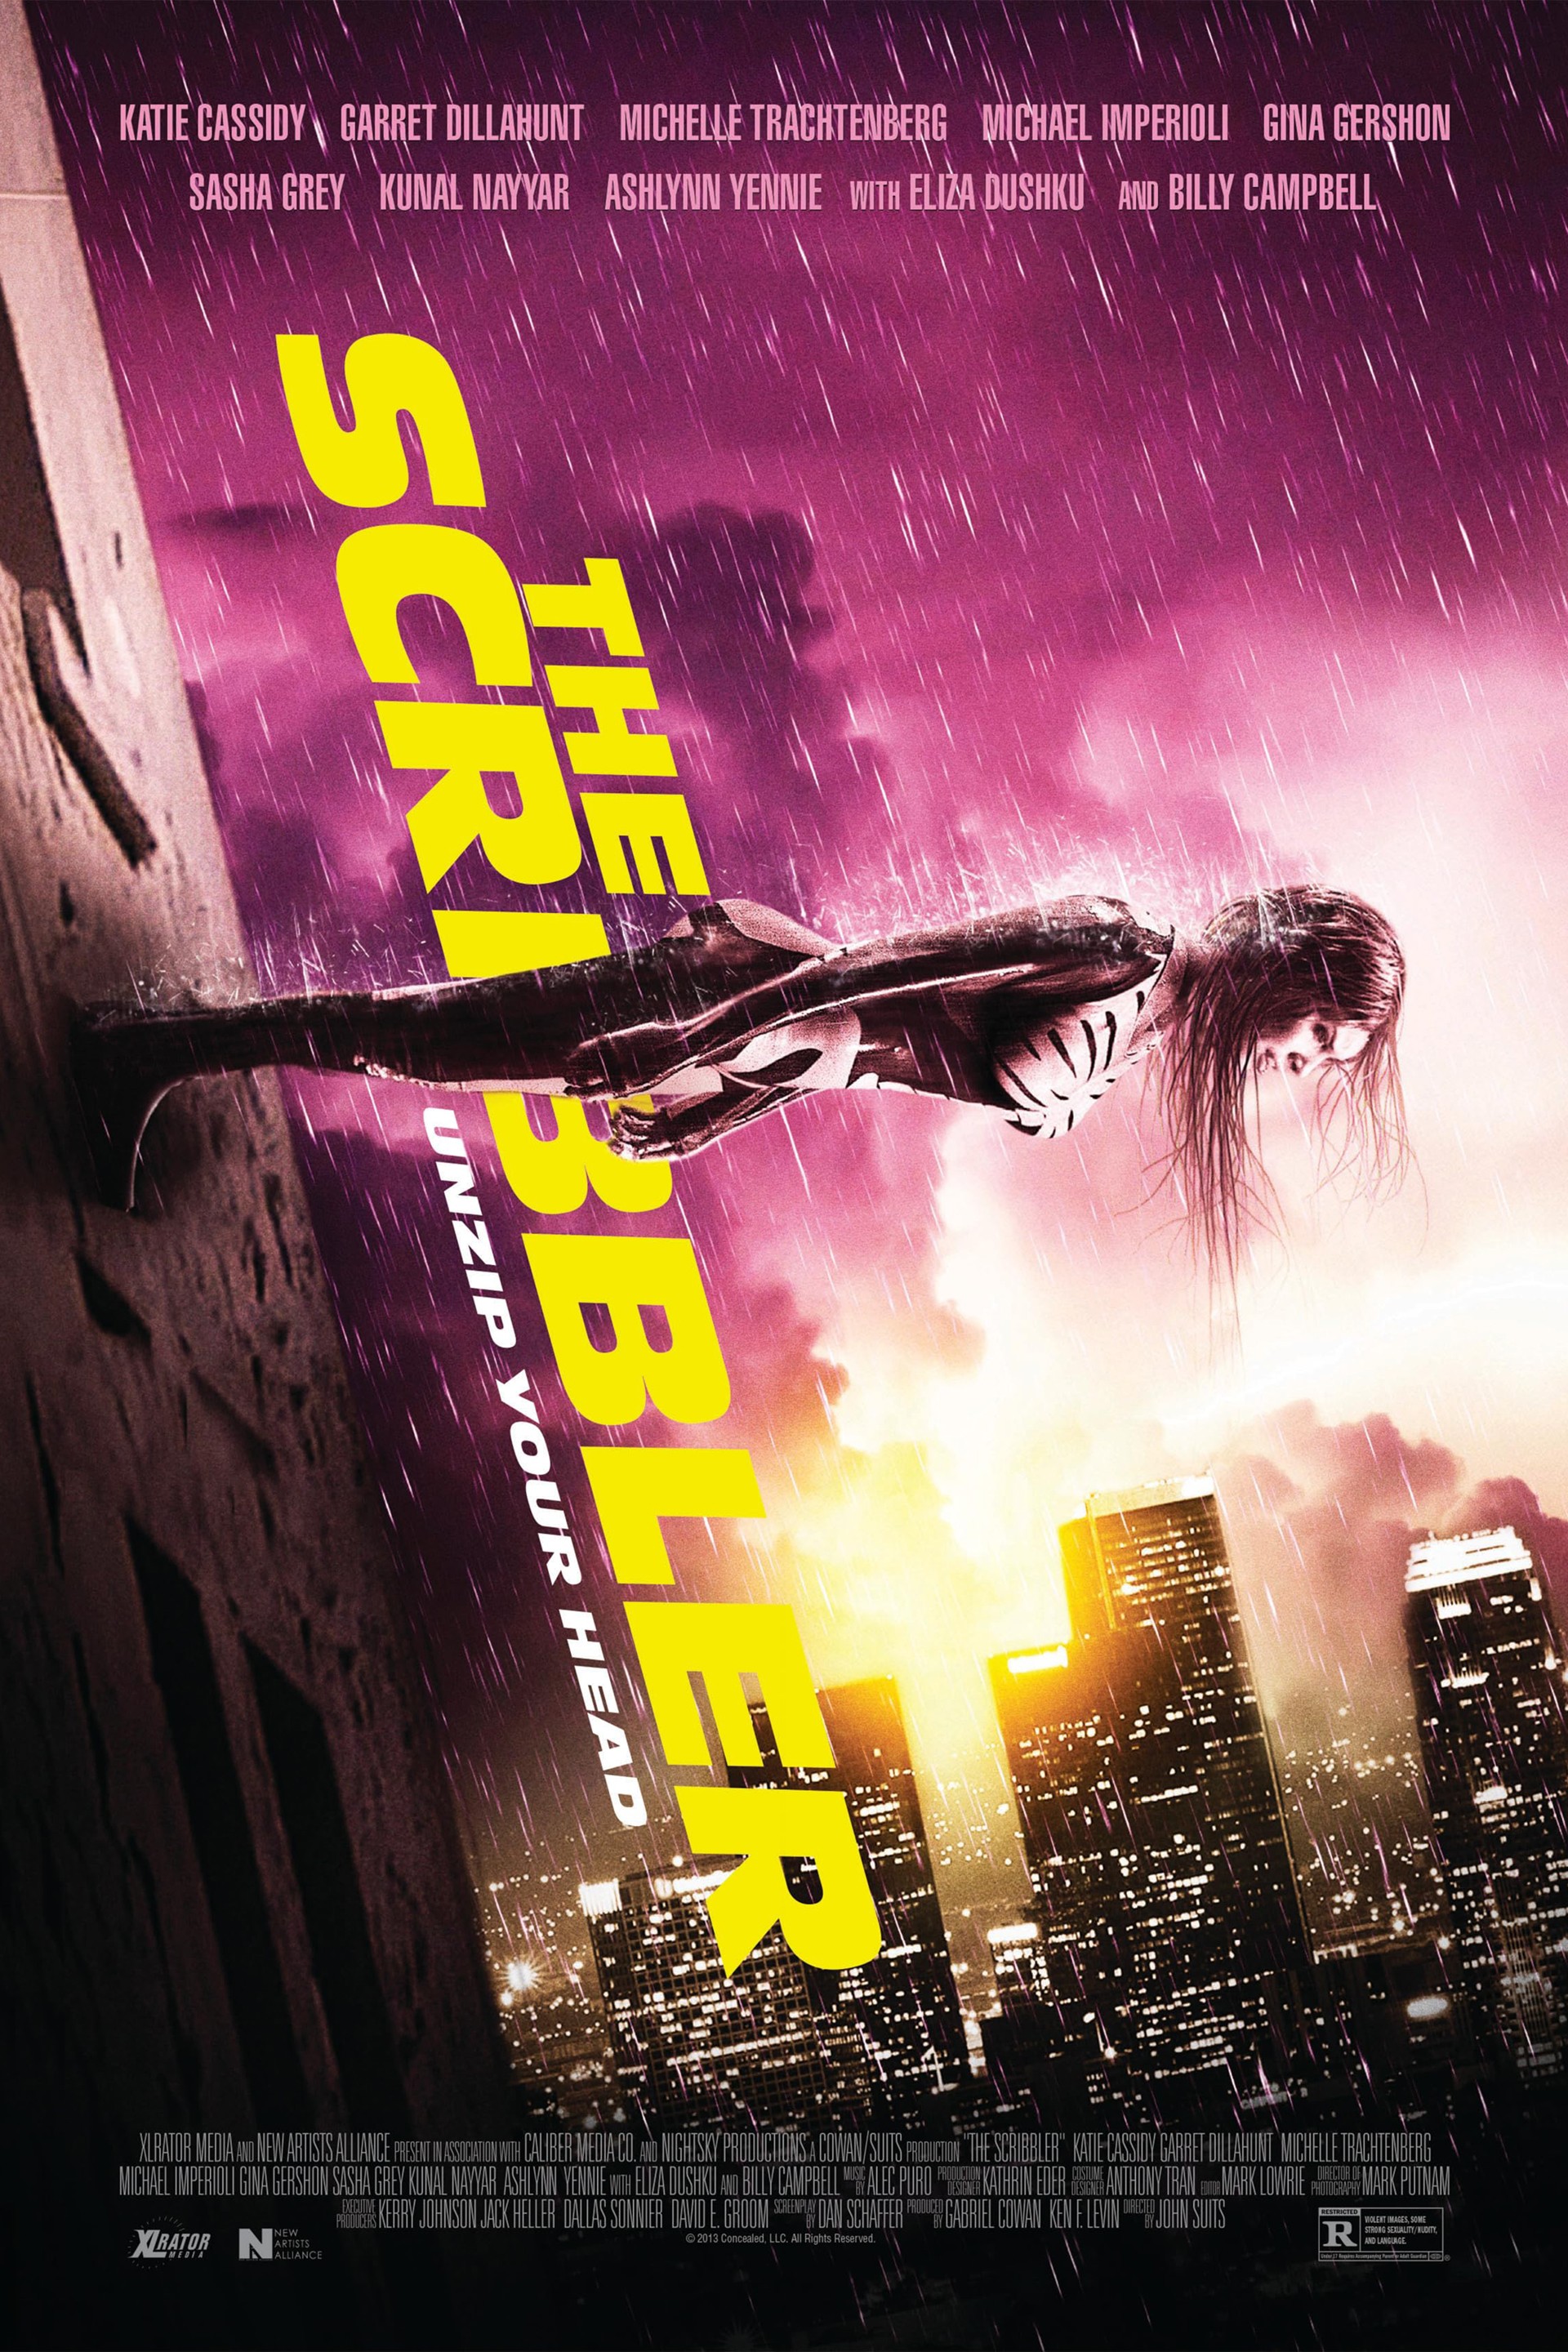 The Maze Runner: The Scorch Trials – Film Racket Movie Reviews